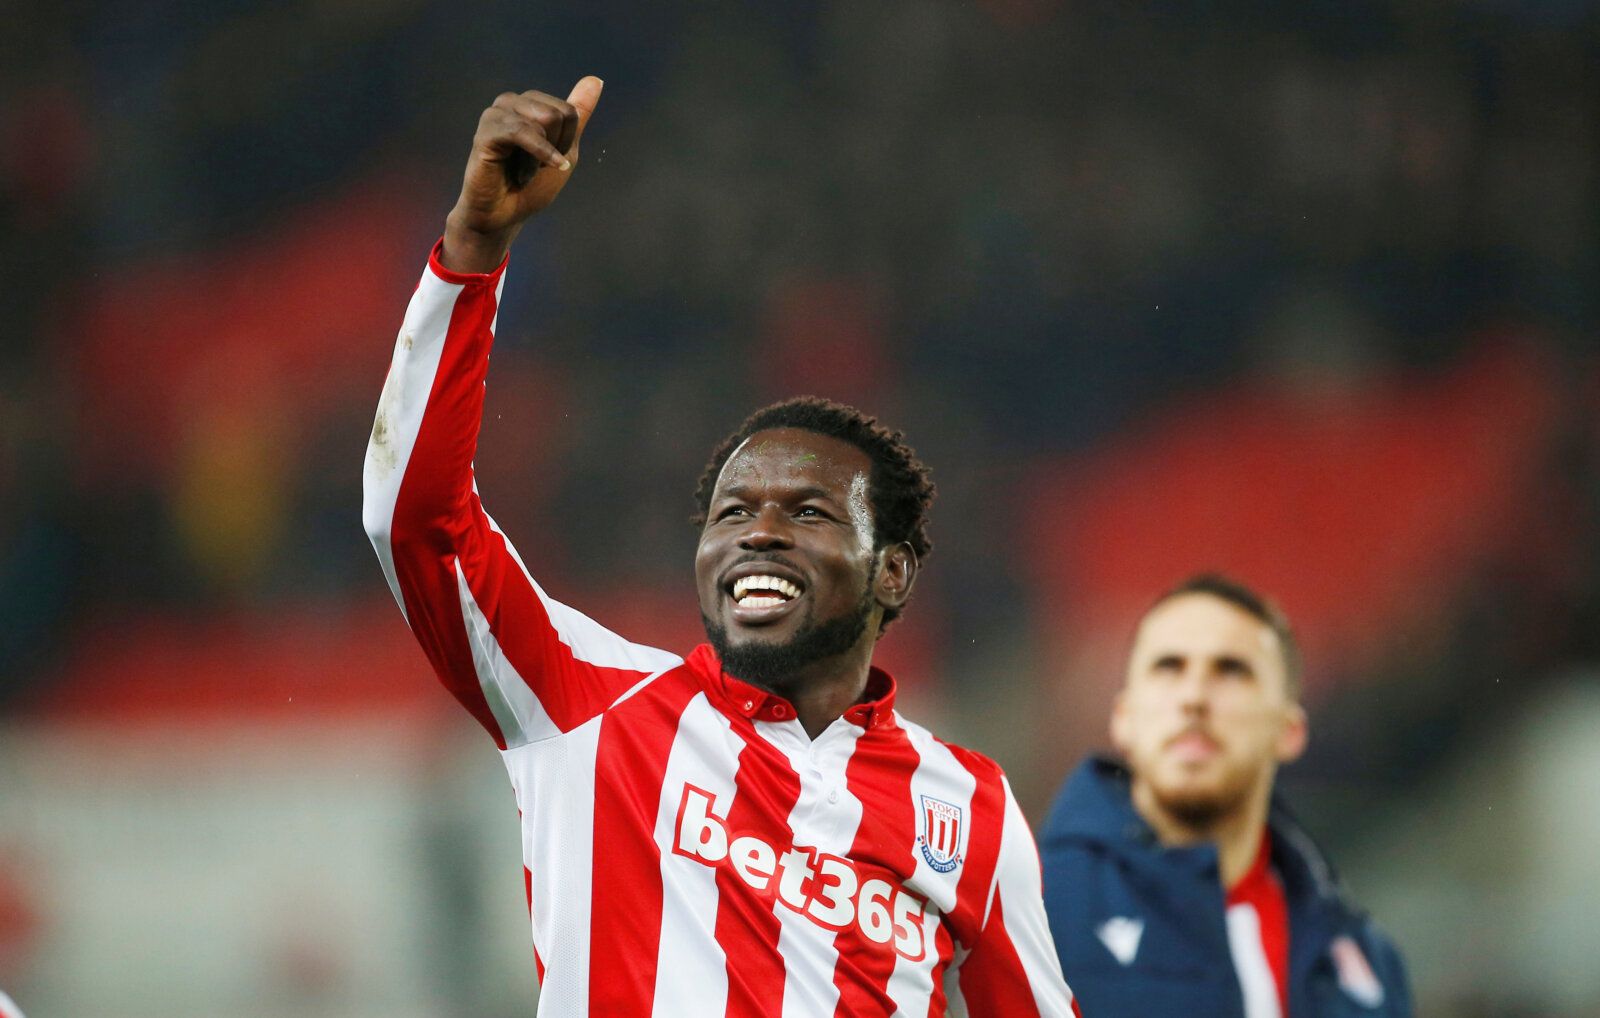 Soccer Football - Championship - Stoke City v Wigan Athletic - bet365 Stadium, Stoke-on-Trent, Britain - November 23, 2019   Stoke City's Mame Biram Diouf celebrates after the match      Action Images/Craig Brough    EDITORIAL USE ONLY. No use with unauthorized audio, video, data, fixture lists, club/league logos or 